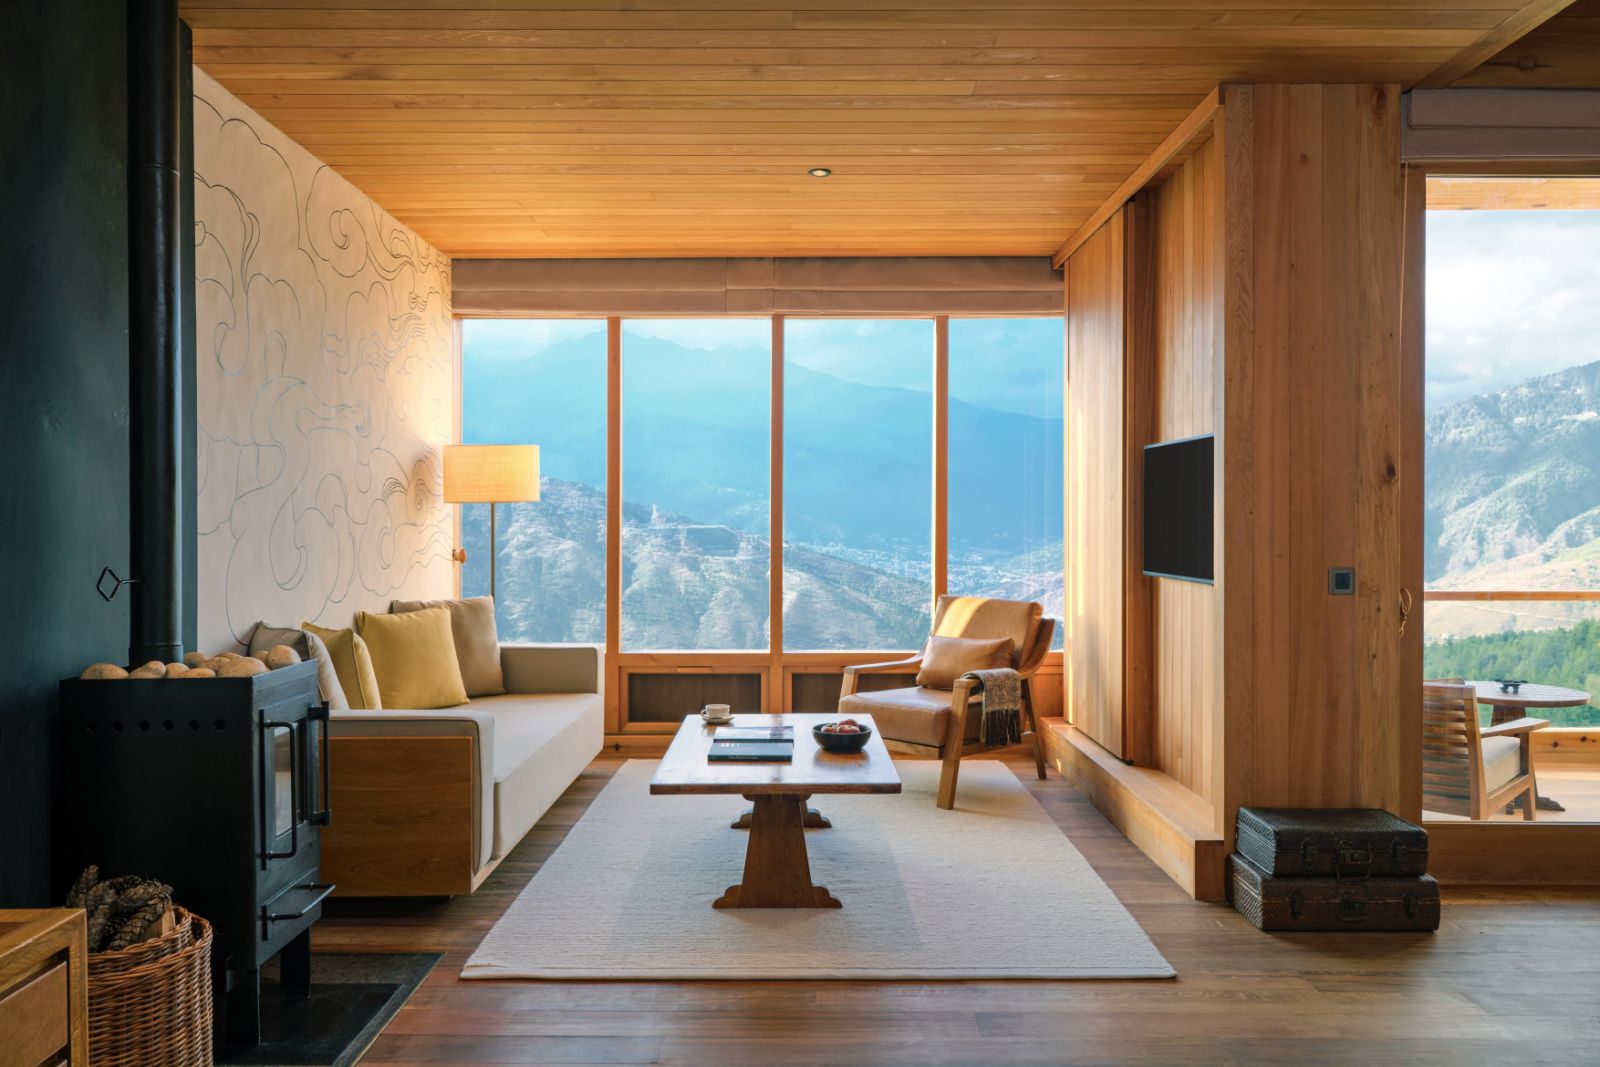 Floor-to-ceiling windows overlooking the mountains in the Thimpu Suite at luxury hotel Six Senses Thimpu Lodge in Bhutan